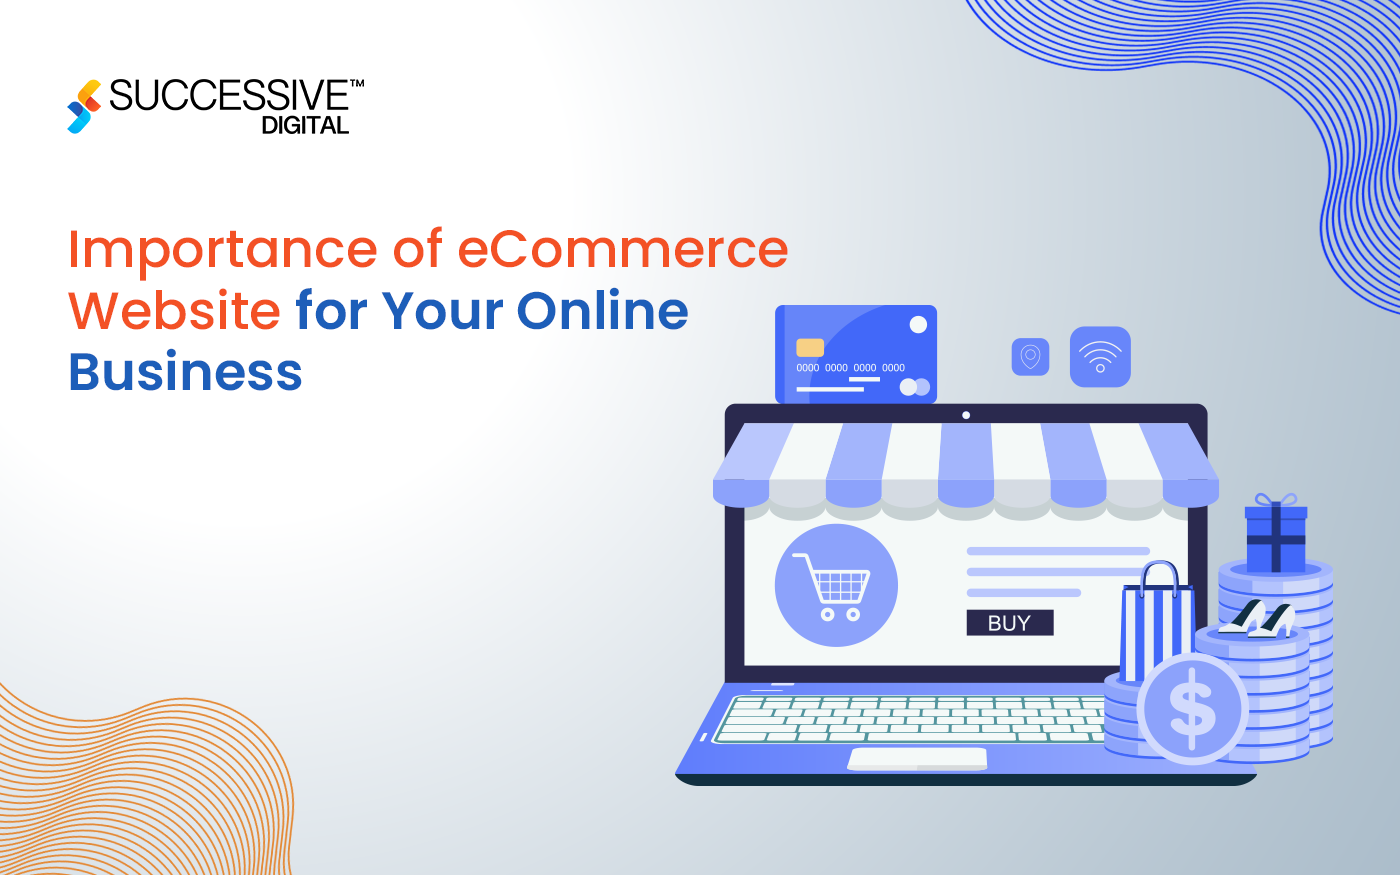 Importance of eCommerce Website for Your Online Business